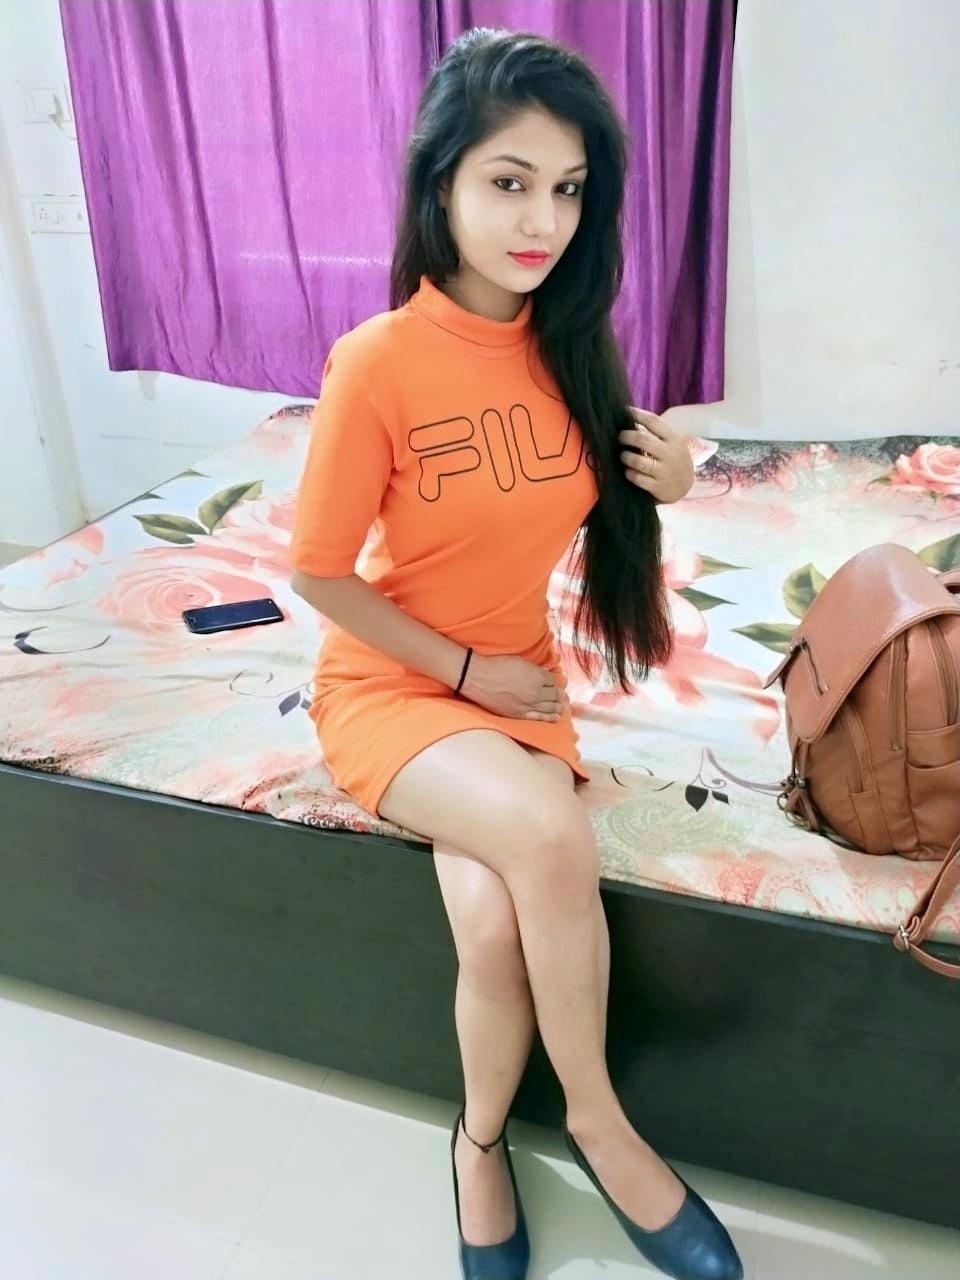 CALL NOW  DILPREET AMRITSAR NO ADVANCE ONLY CASH PAIYMENT GENUINE HIGH QUALITY INDEPENDENT MODELS CALL GIRLS